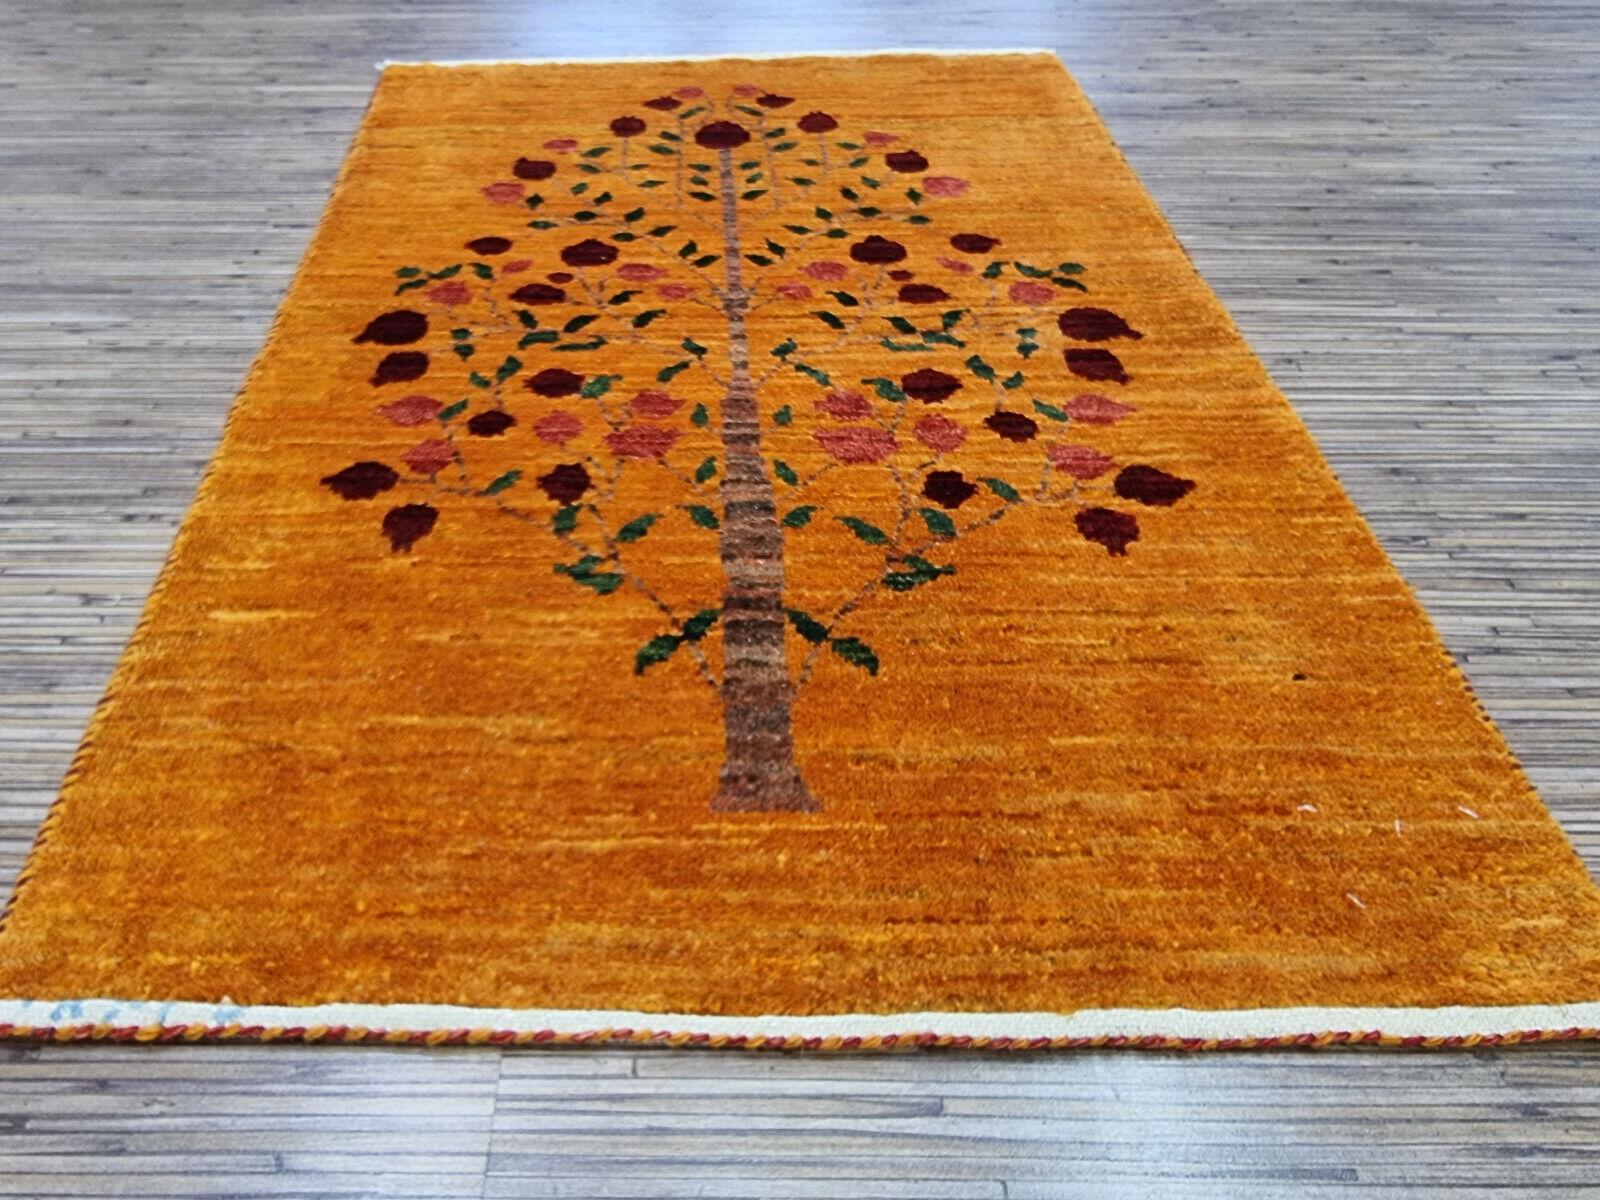 Wool Handmade Vintage Persian Style Gabbeh Rug 2' x 3', 1980s - 1D119 For Sale